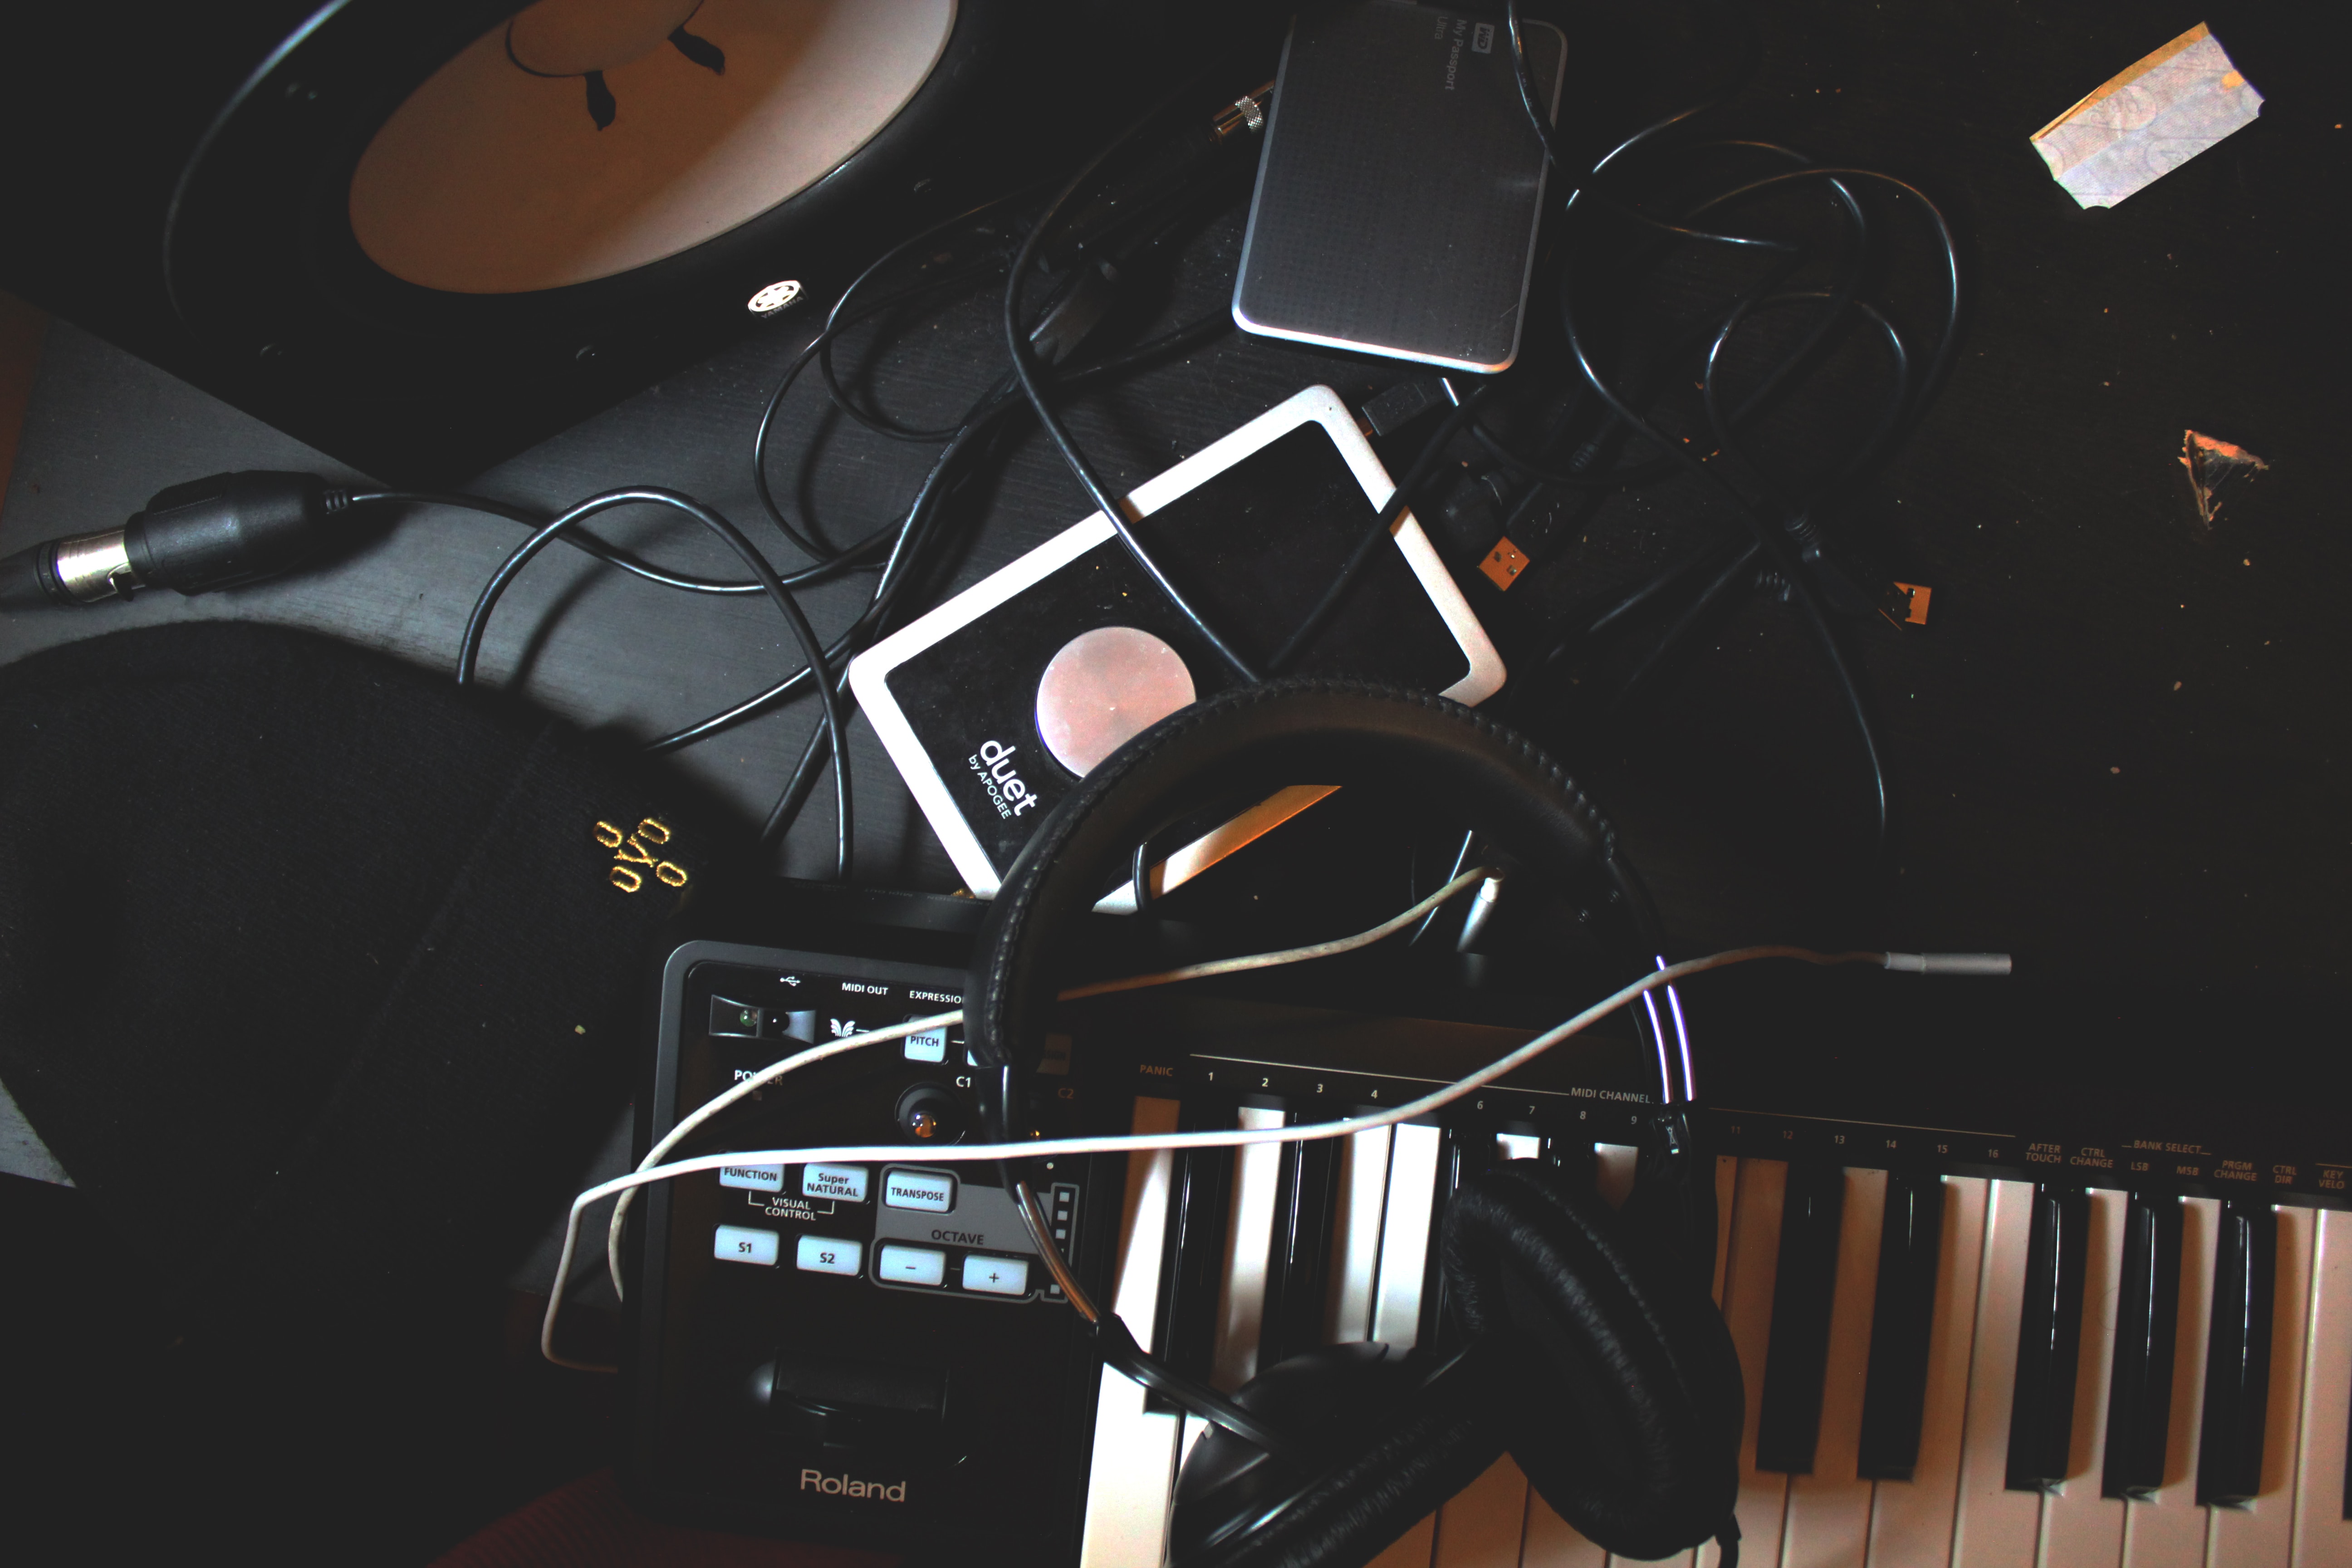 Music Studio Picture. Download Free Image & Stock